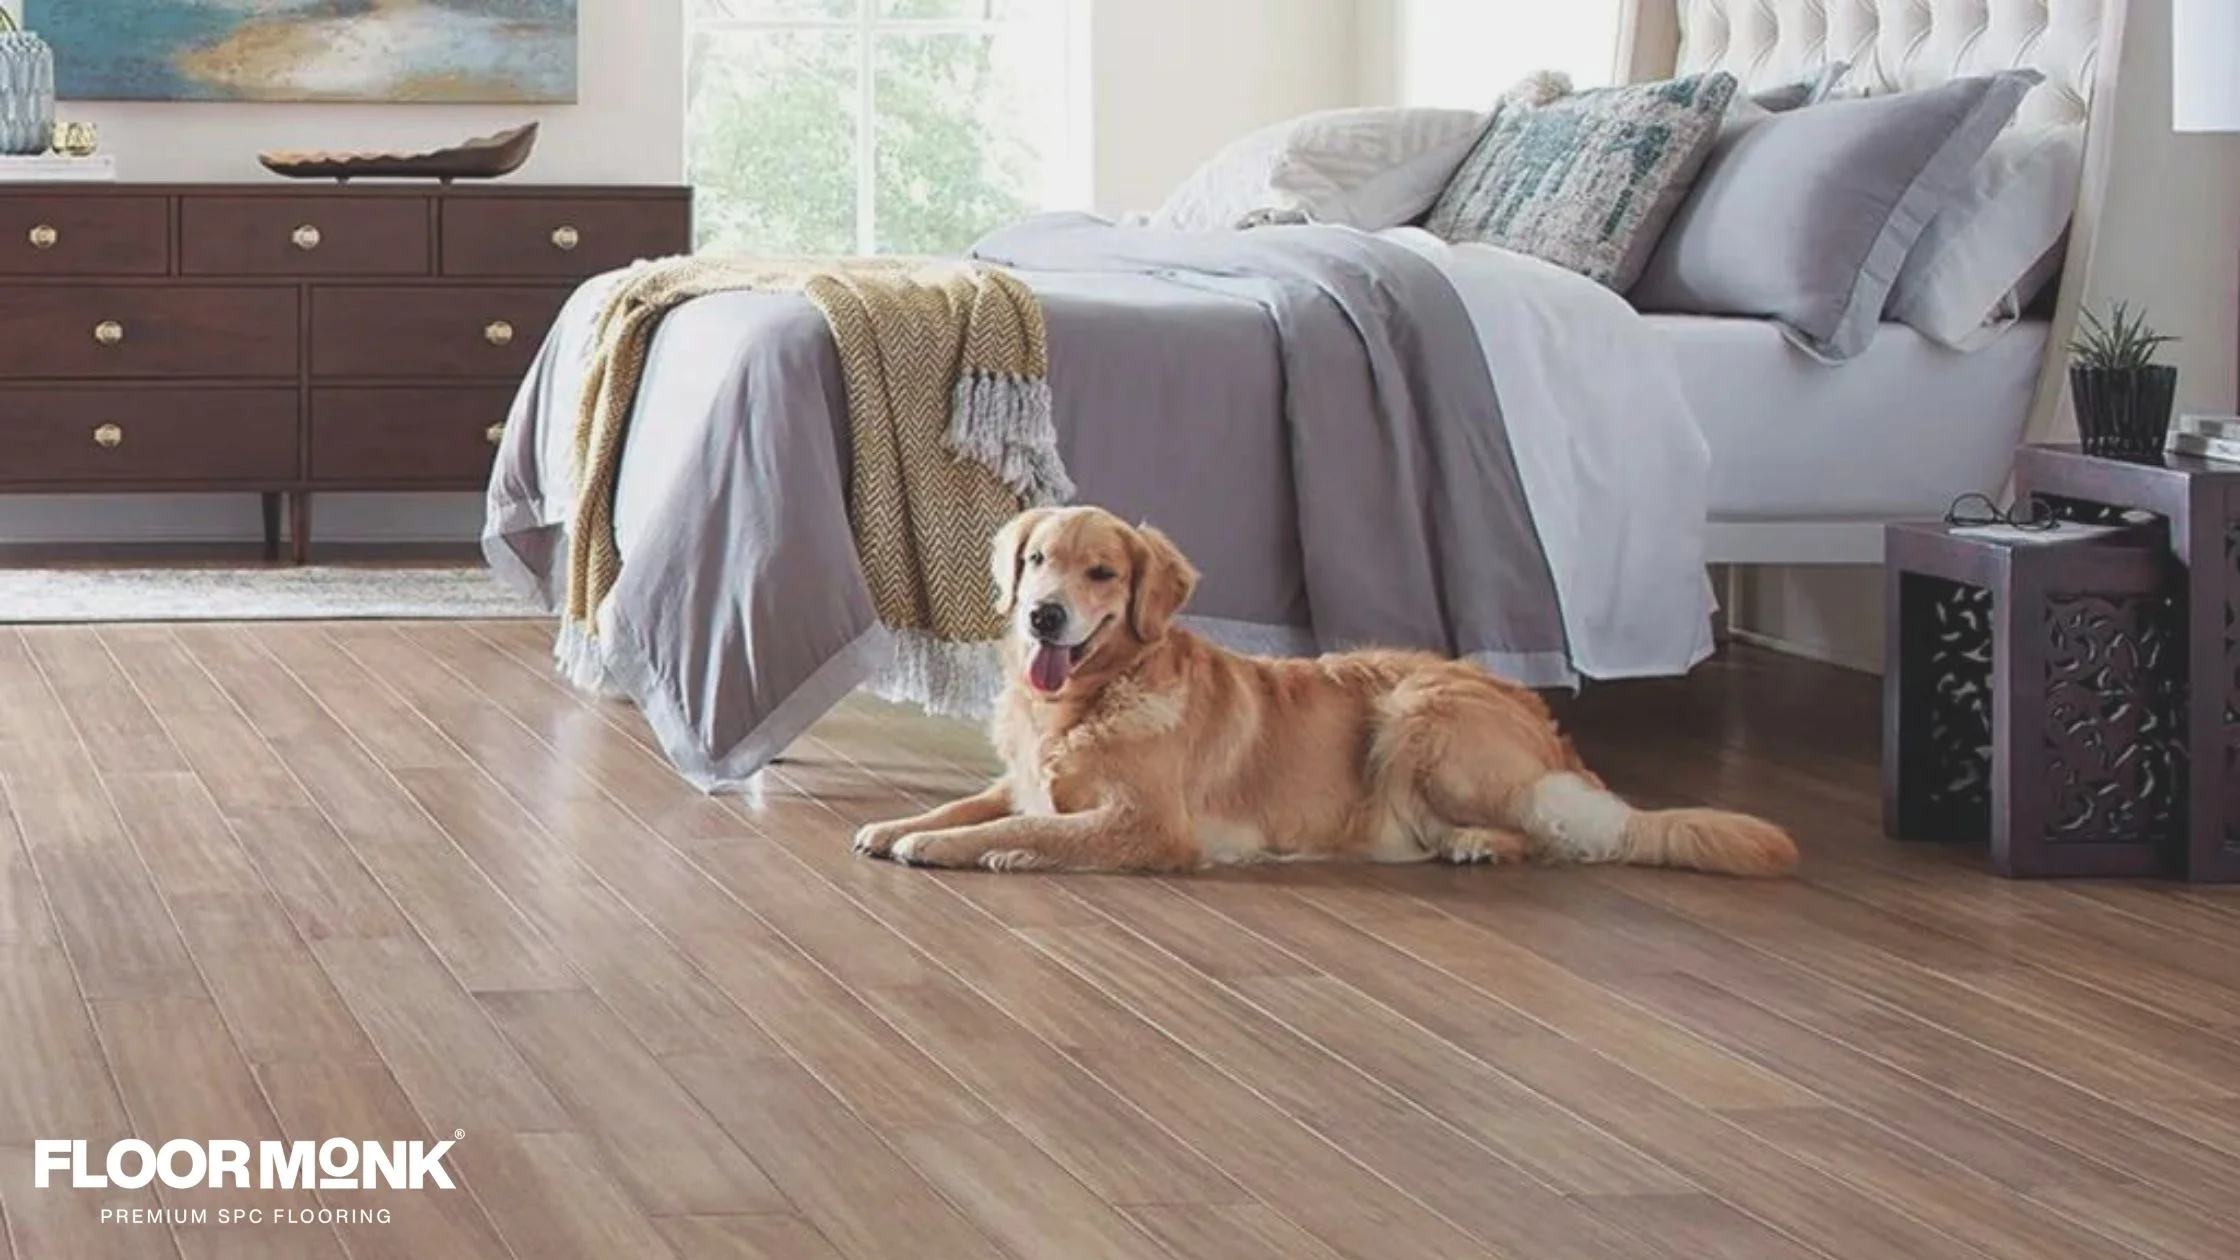 What to Consider When Choosing Pet-Friendly Flooring